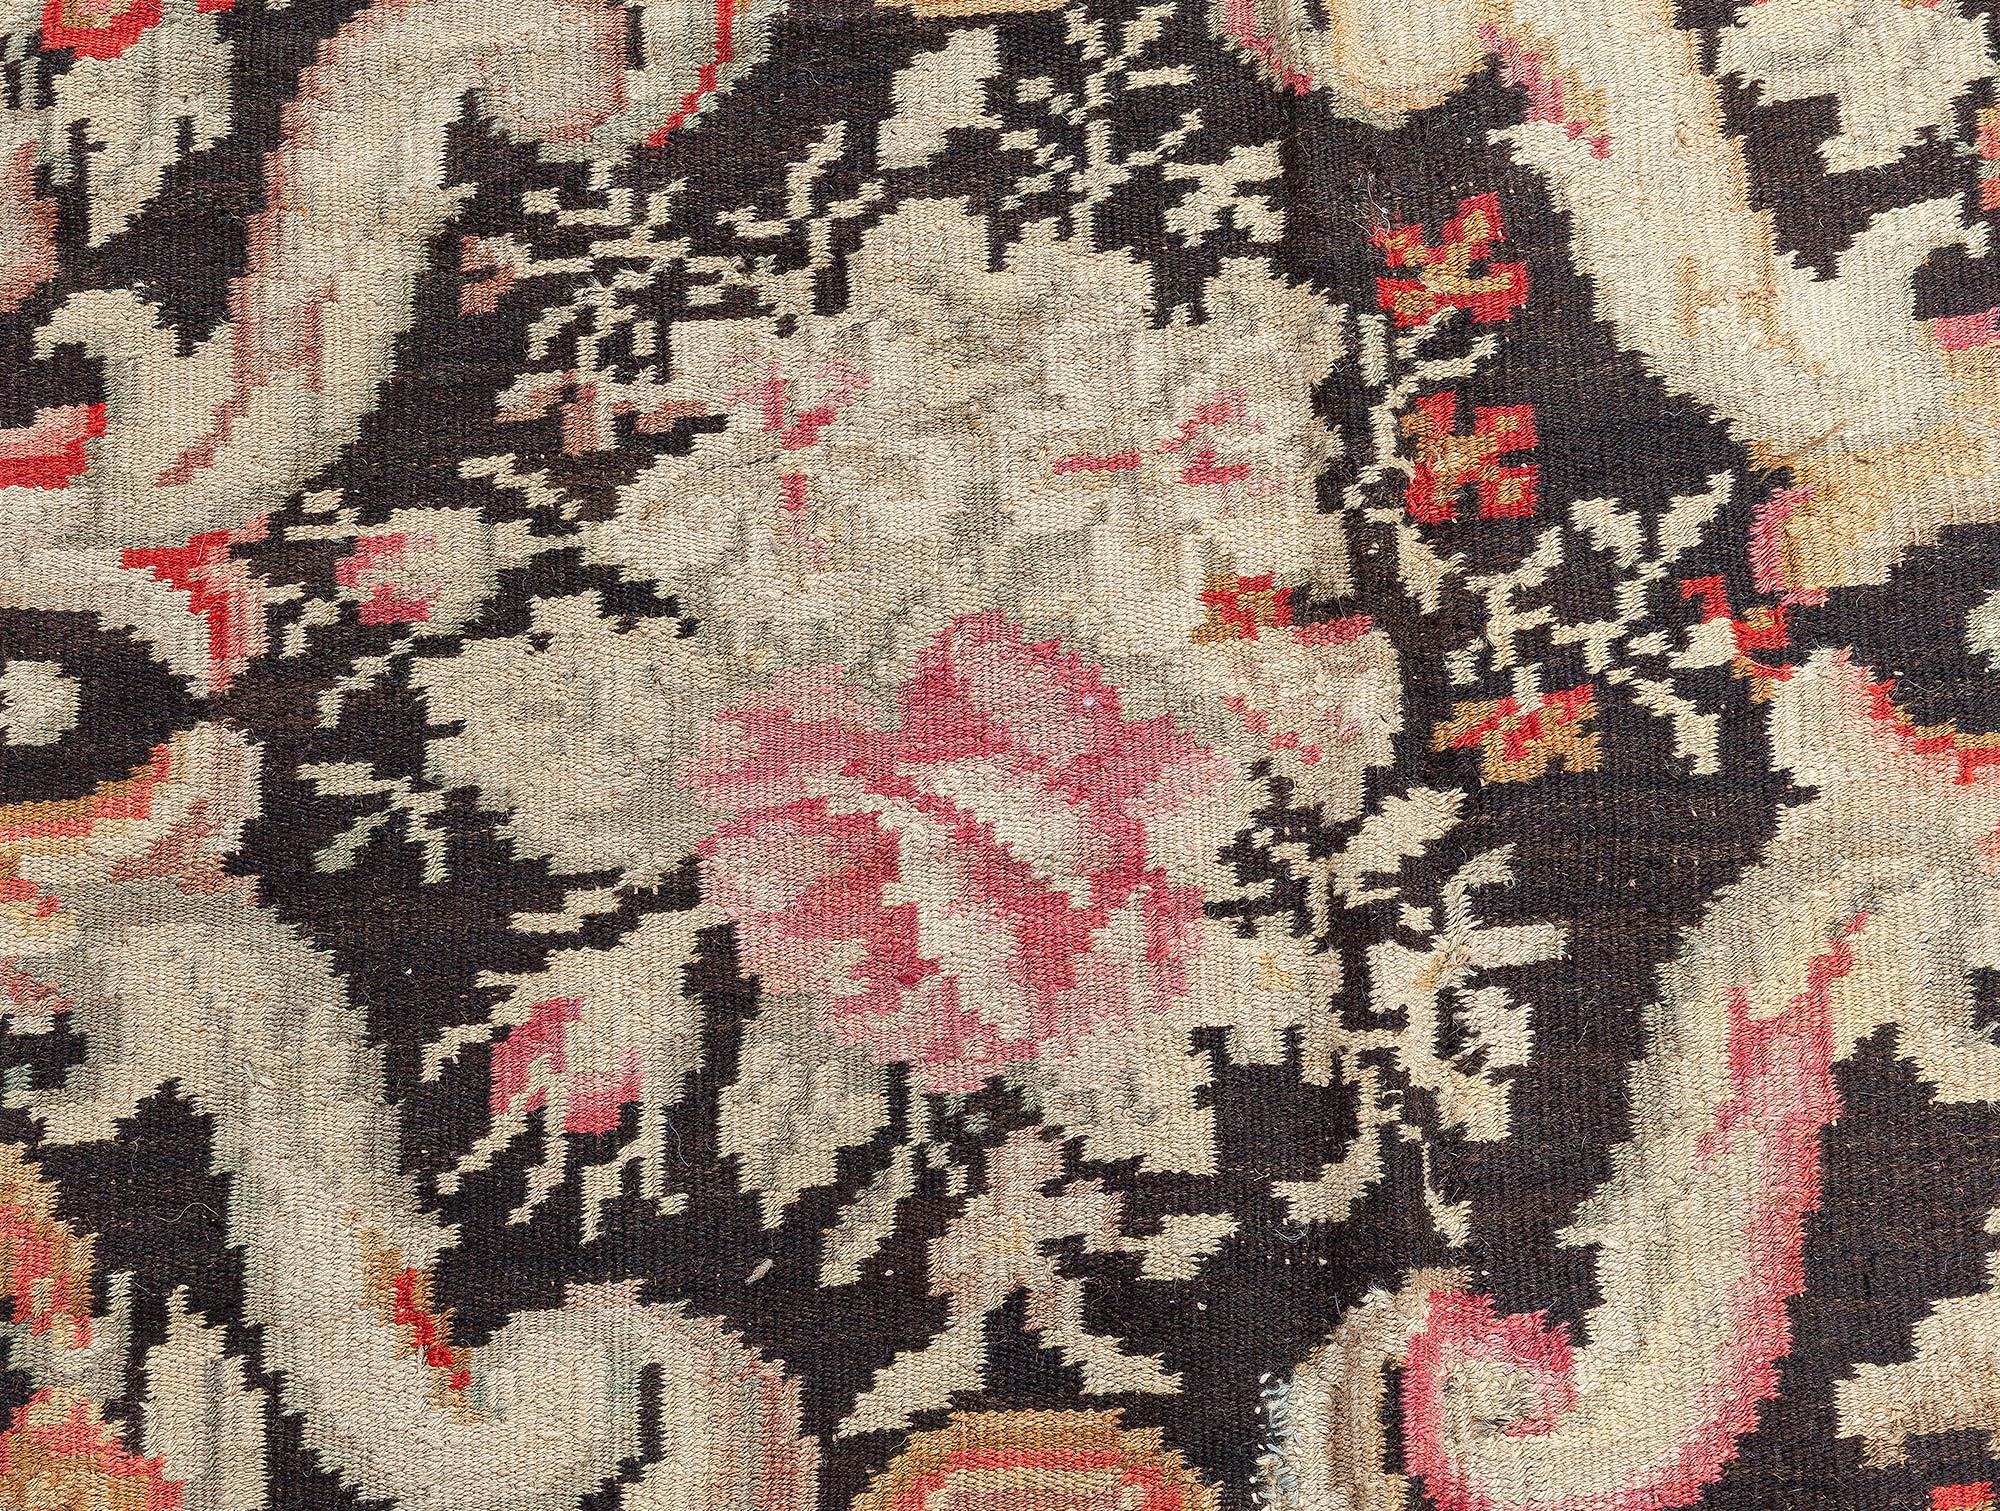 Early 20th century Russian Bessarabian floral handmade wool rug
Size: 10'0